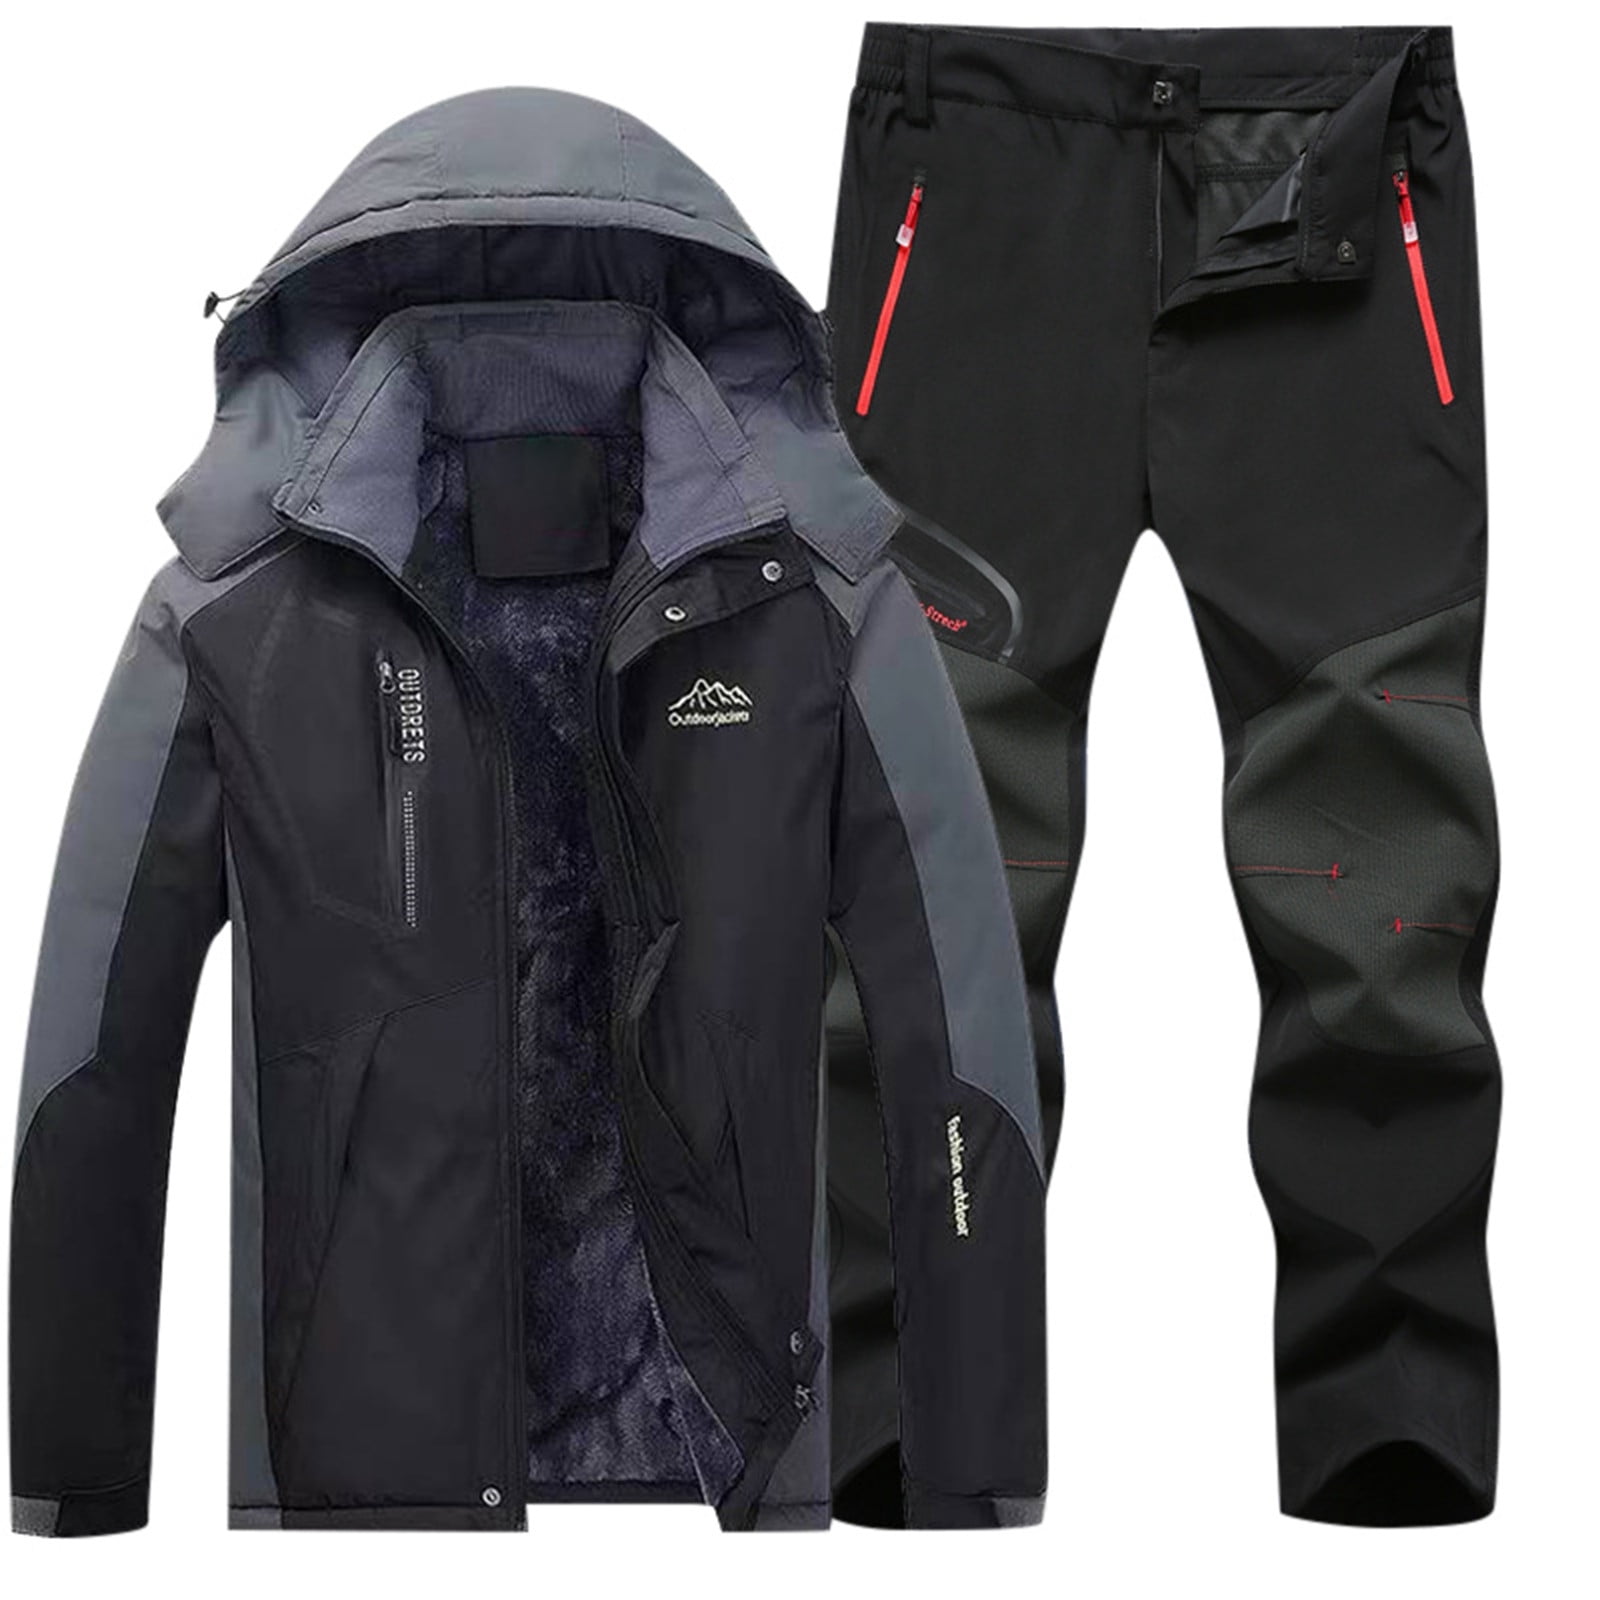 Men'S Ski Wear Winter Windproof Hooded Jacket And Pants Suitable For ...